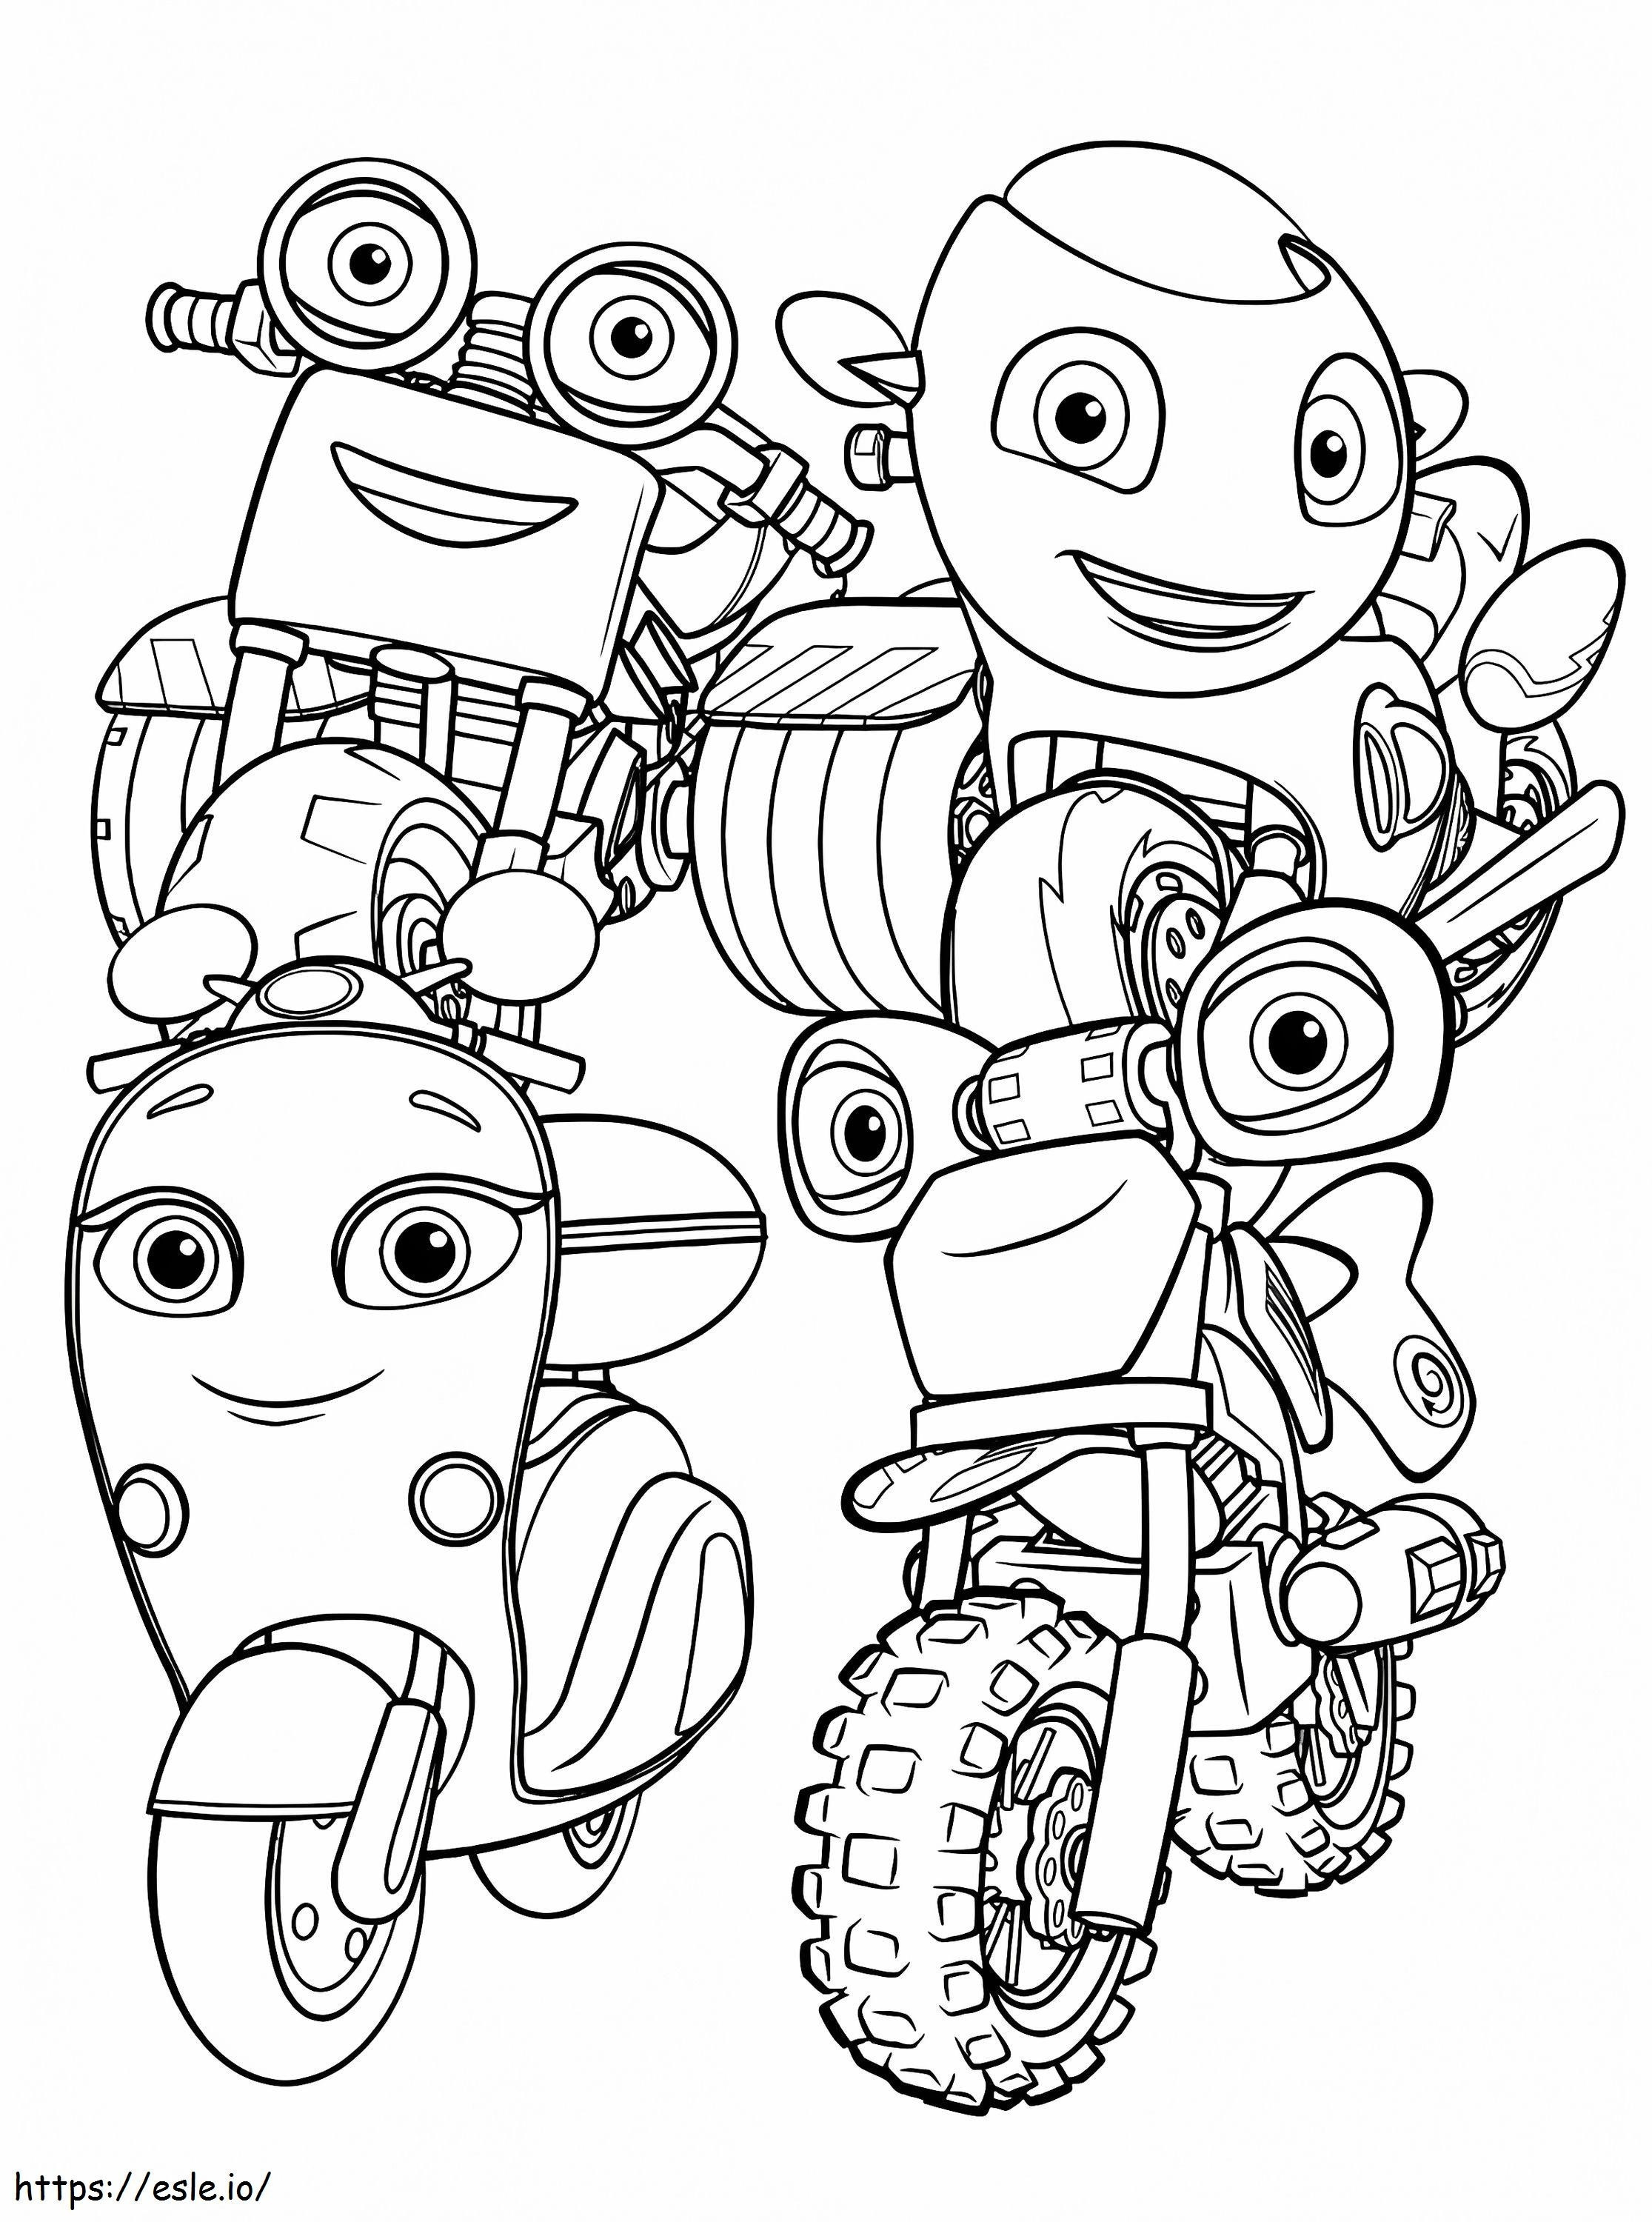 Vewtg326Ty2W coloring page